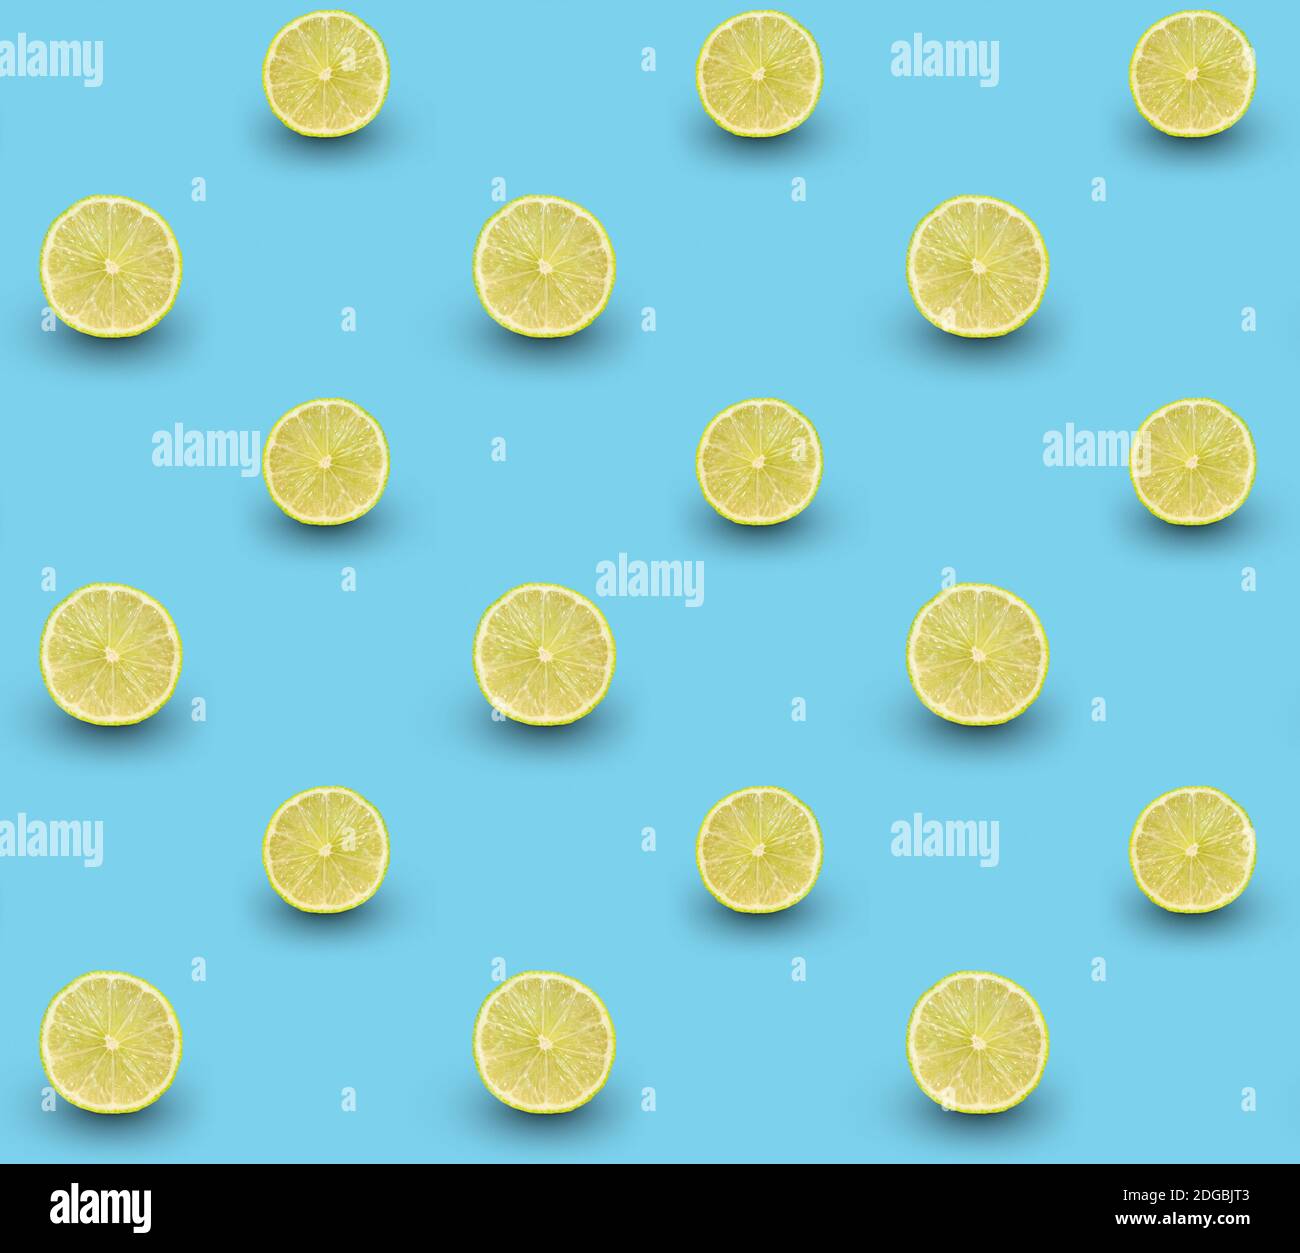 Repeated seamless pattern of many sliced ripe limes on light blue background. Stock Photo